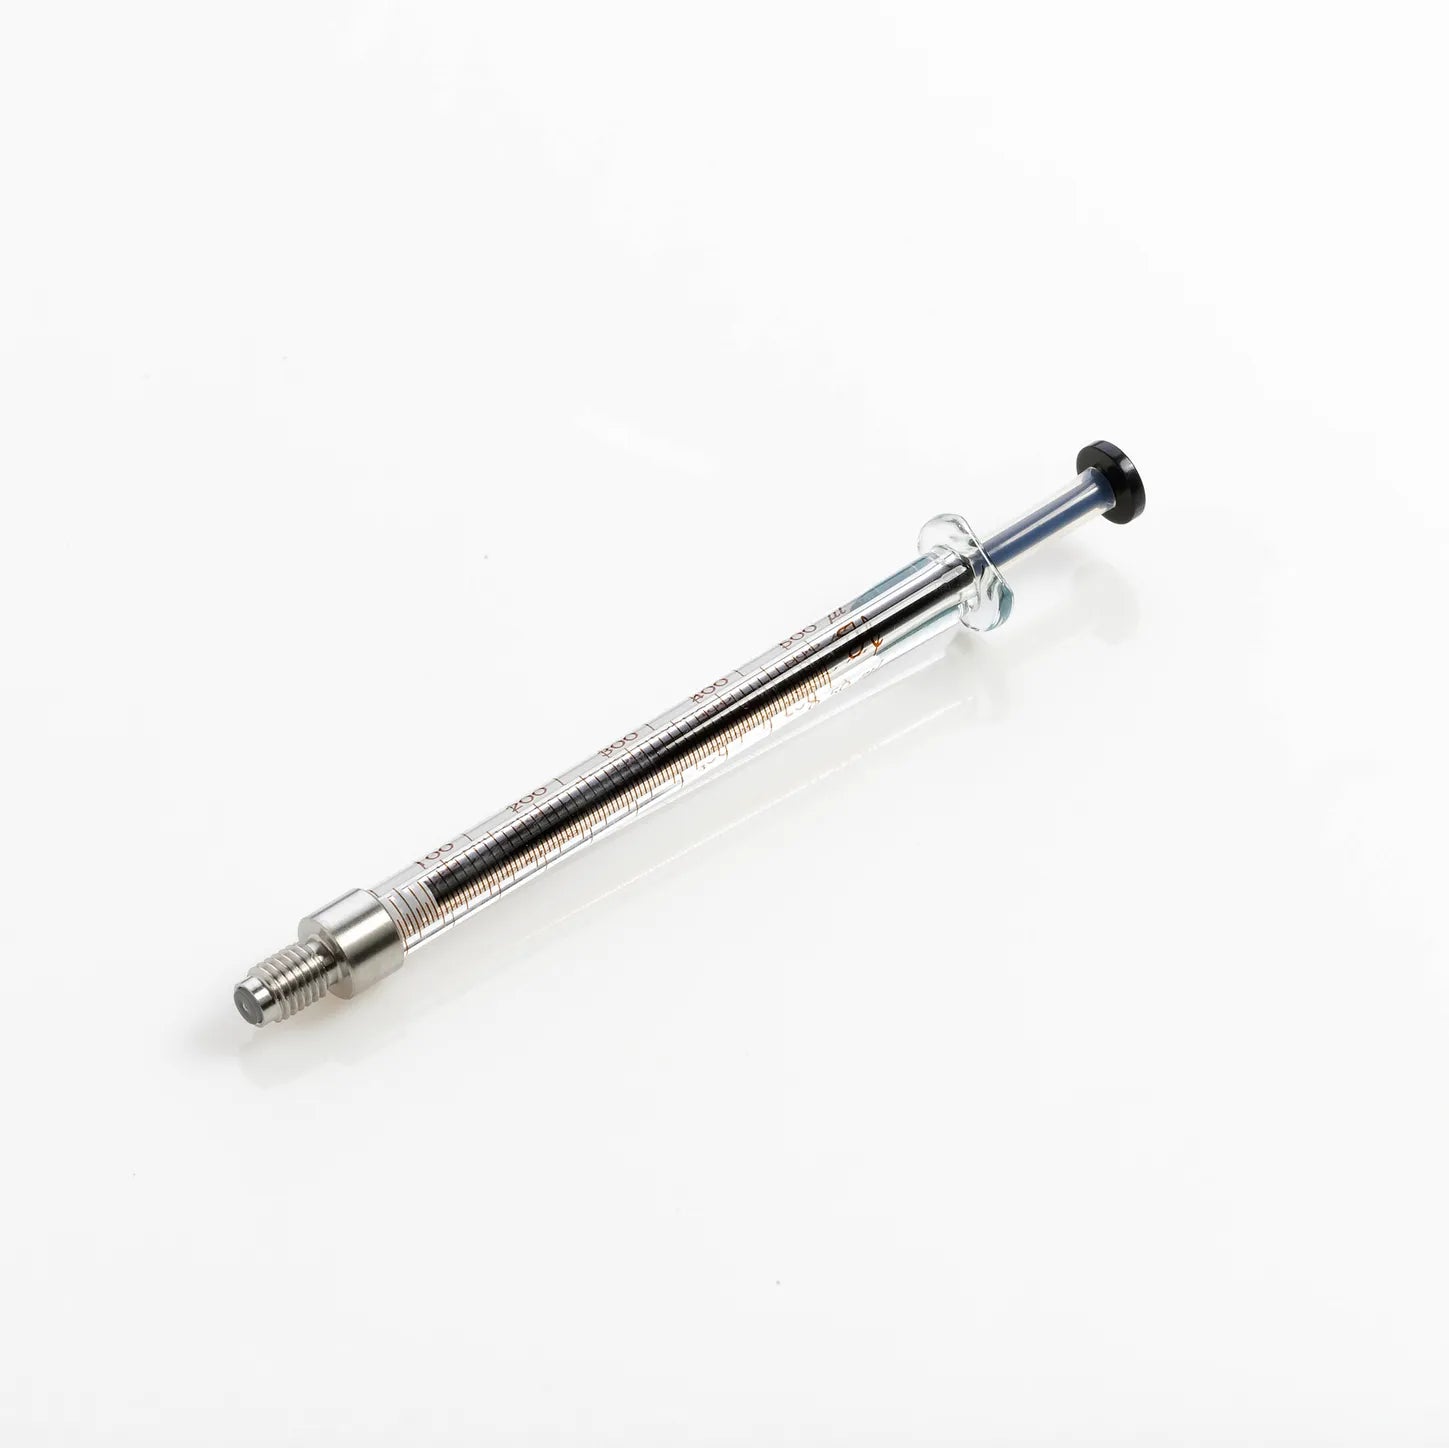 Syringe, 500µL, Comparable to Thermo/Dionex # 3301-0100